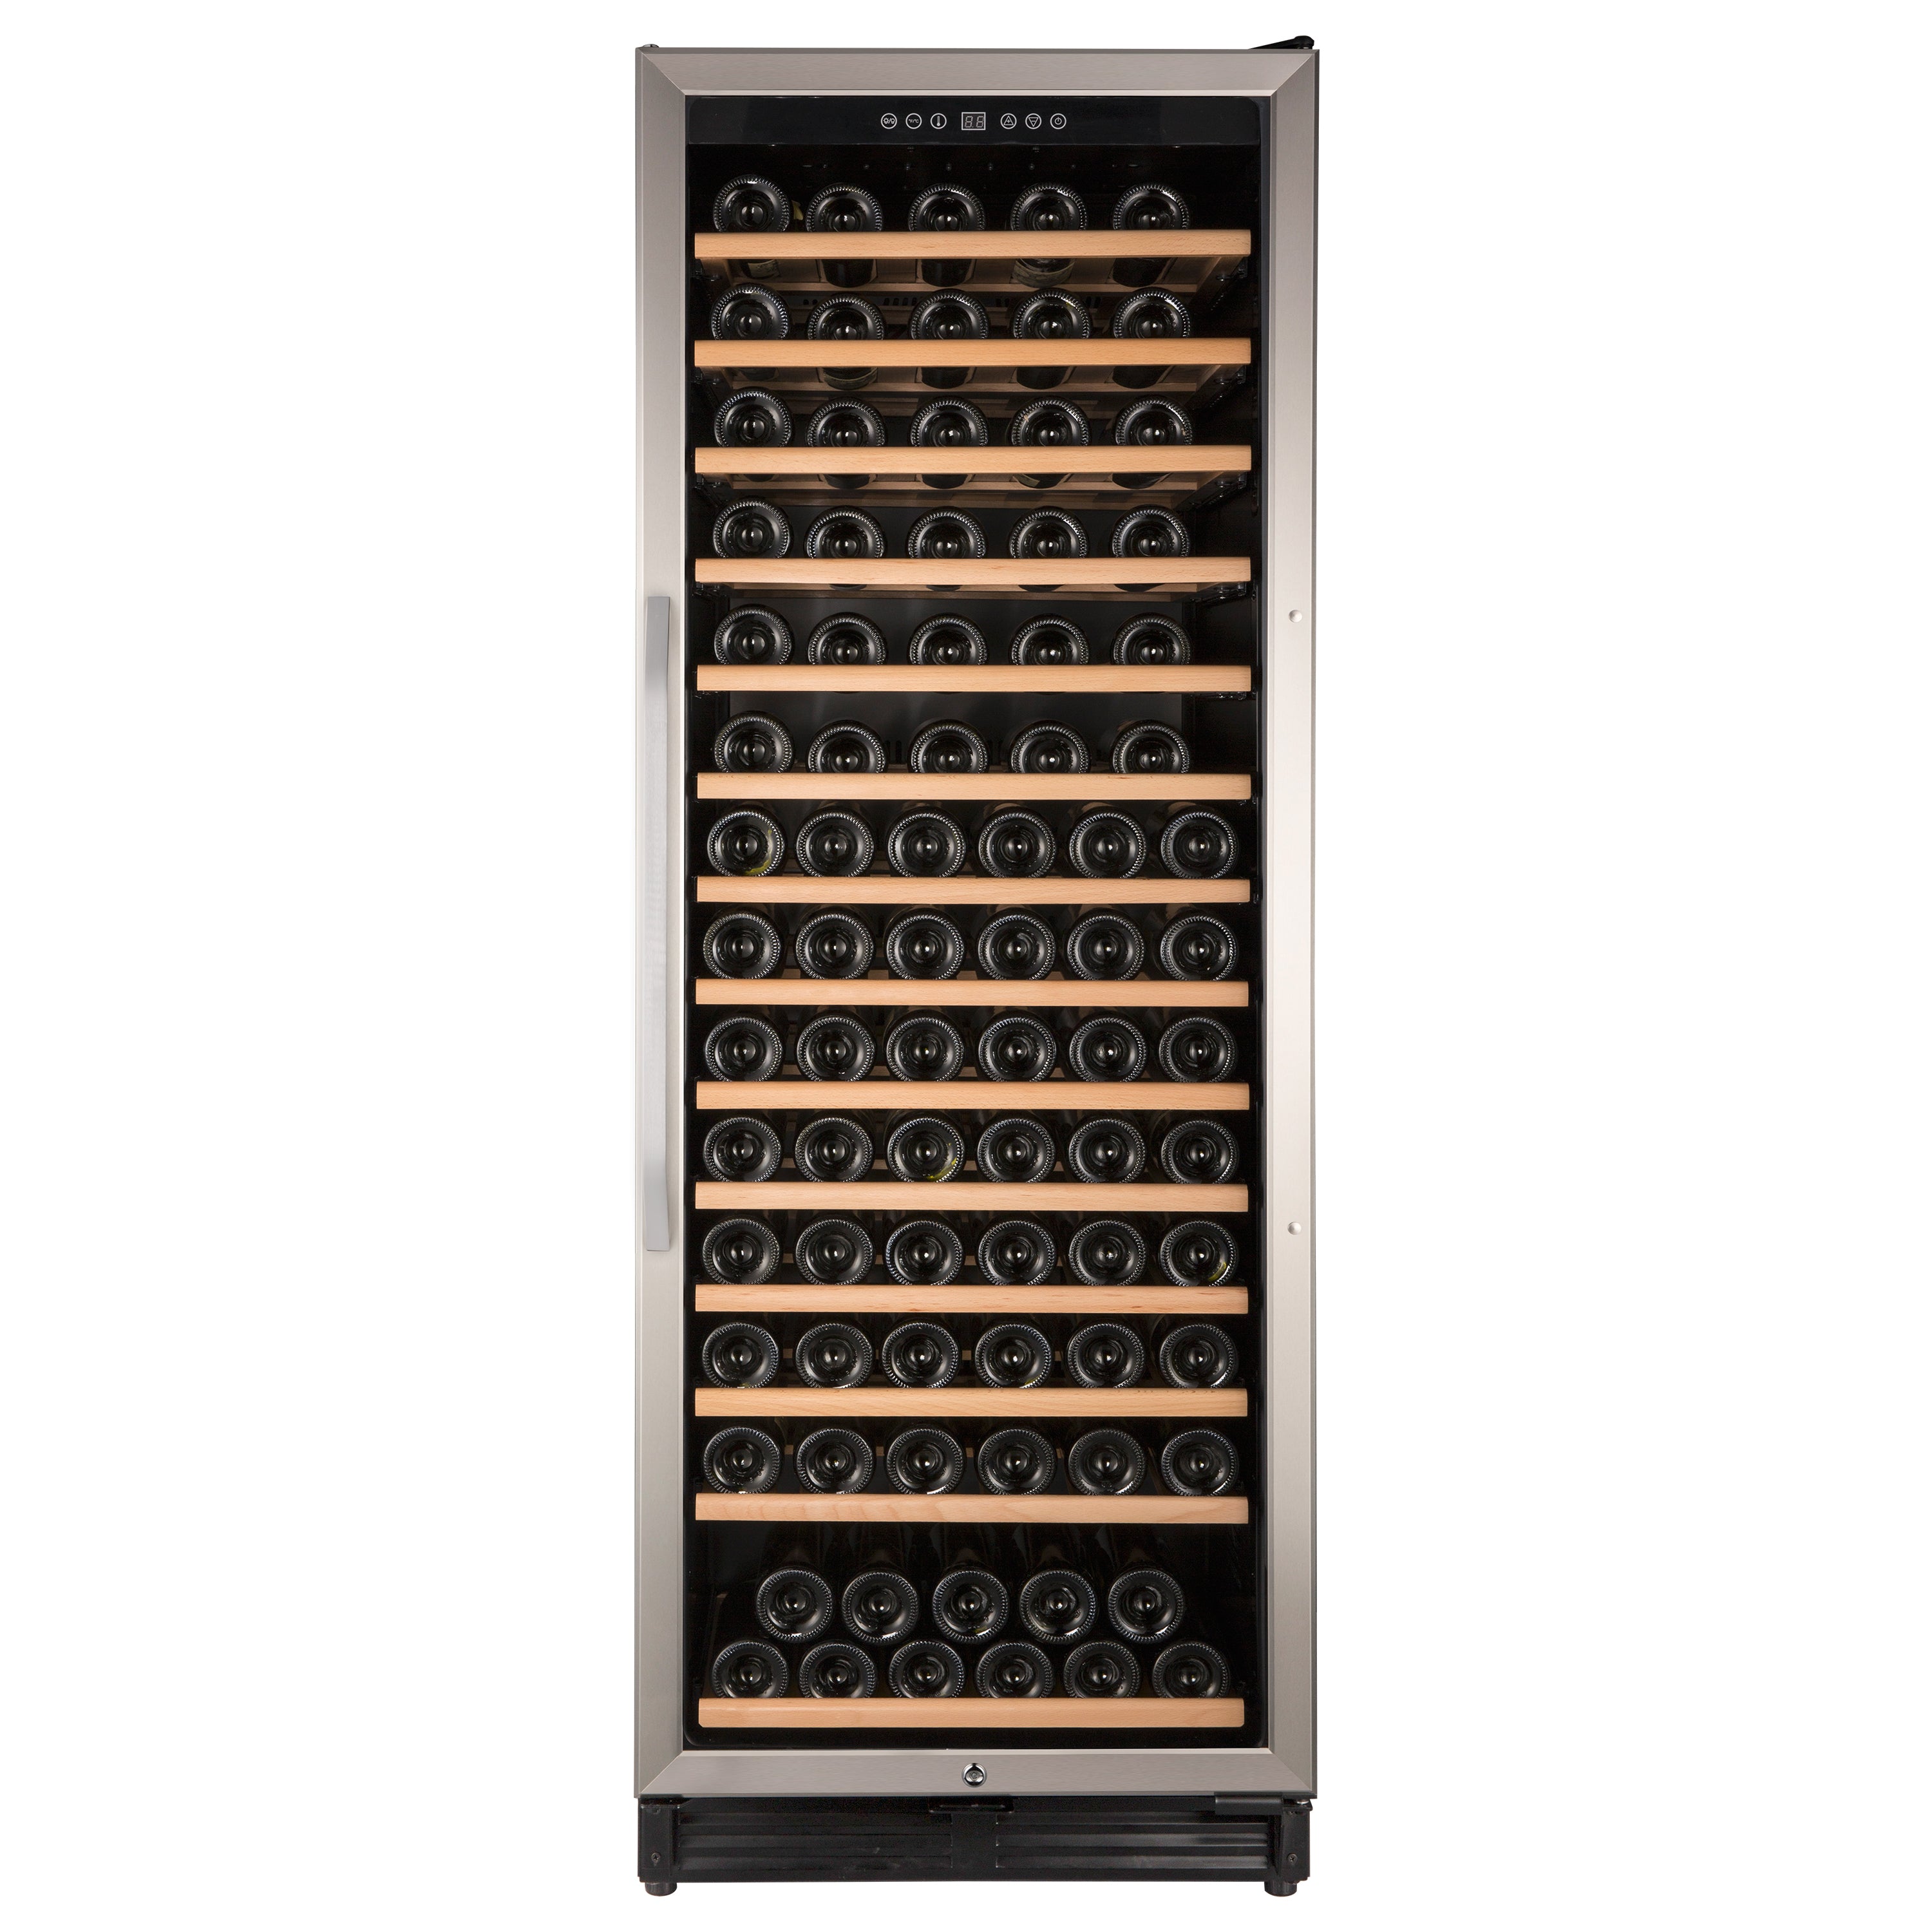 Avanti - WCF149SE3S, Avanti Wine Cooler, 149 Bottle Capacity, in Stainless Steel with Wood Accent Shelving